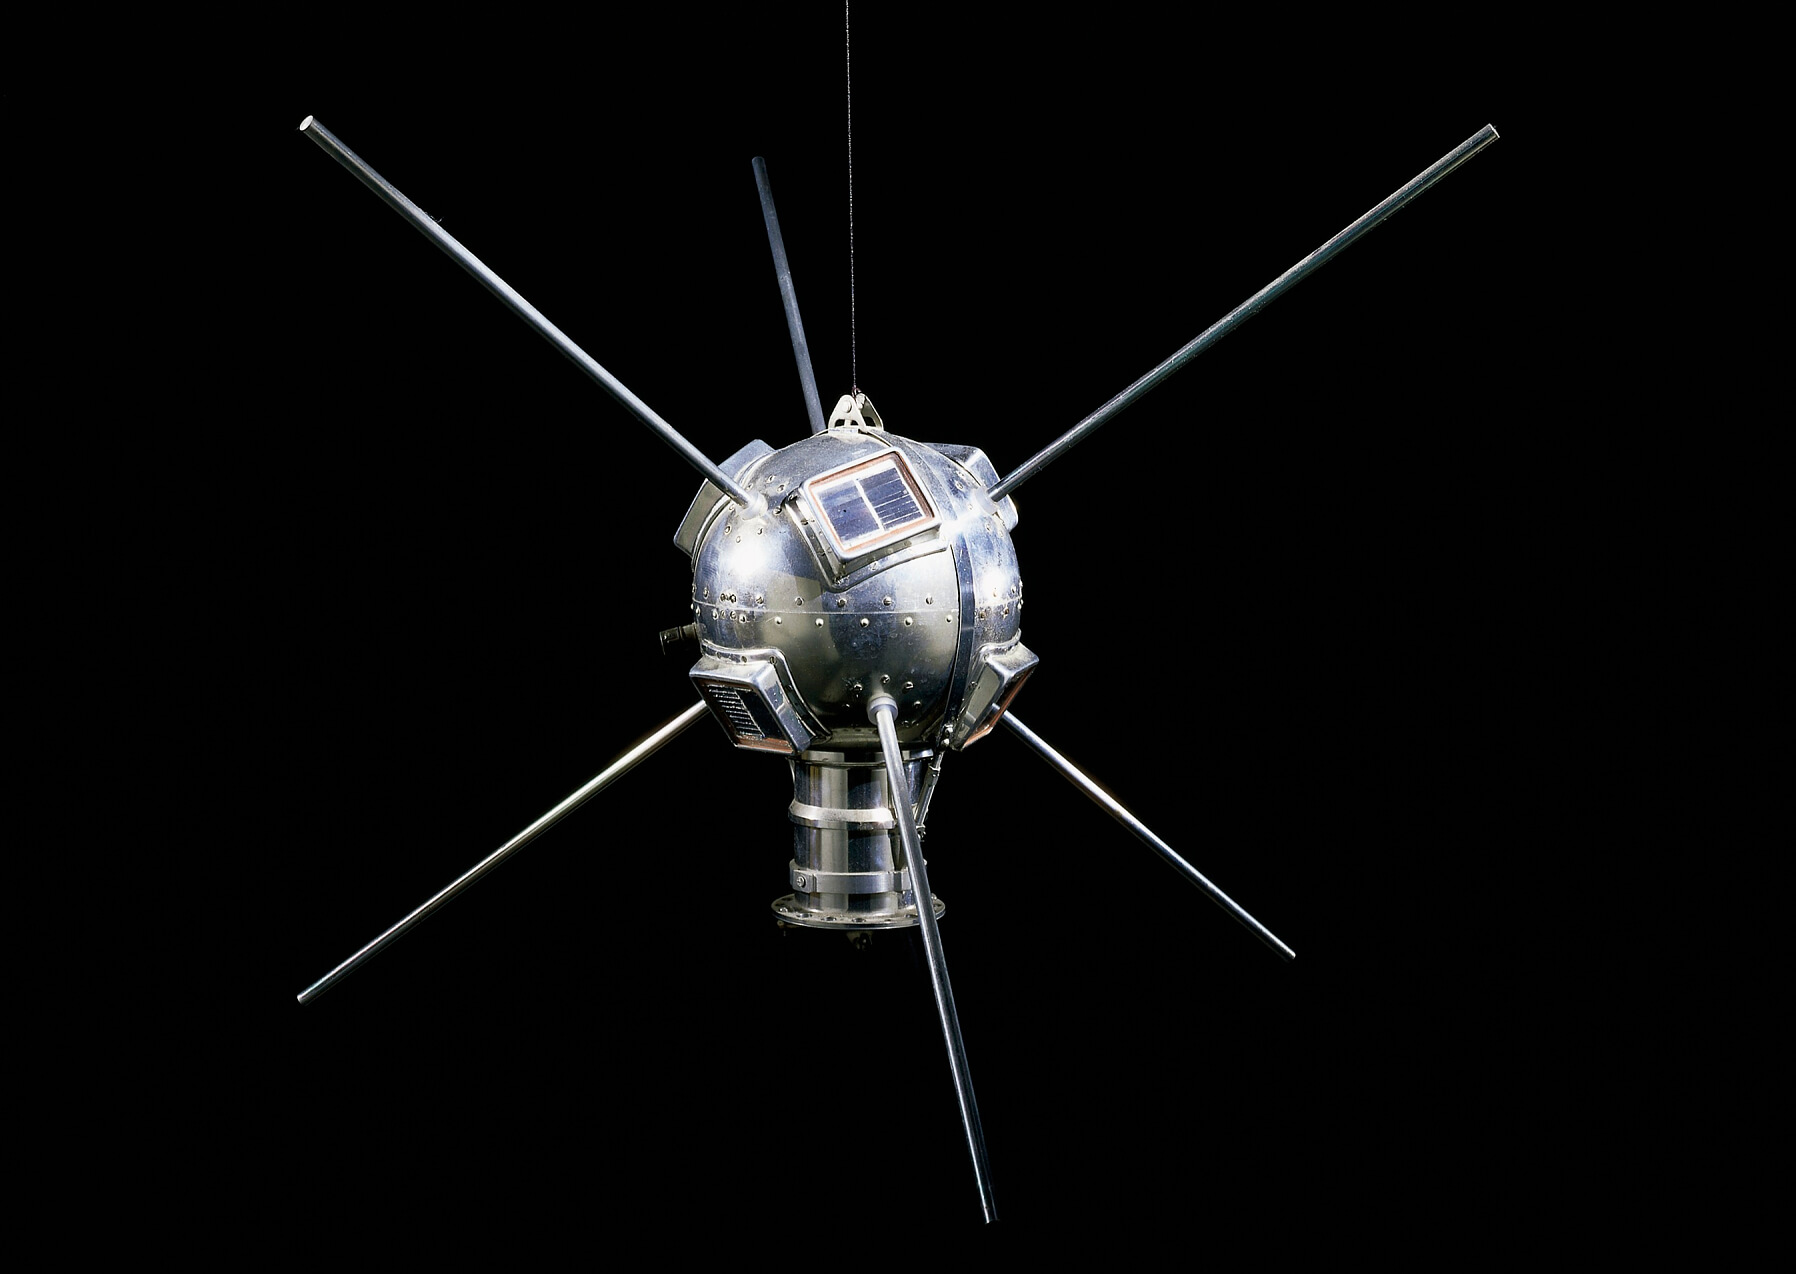 65 years ago, Vanguard 1, the second American artificial satellite